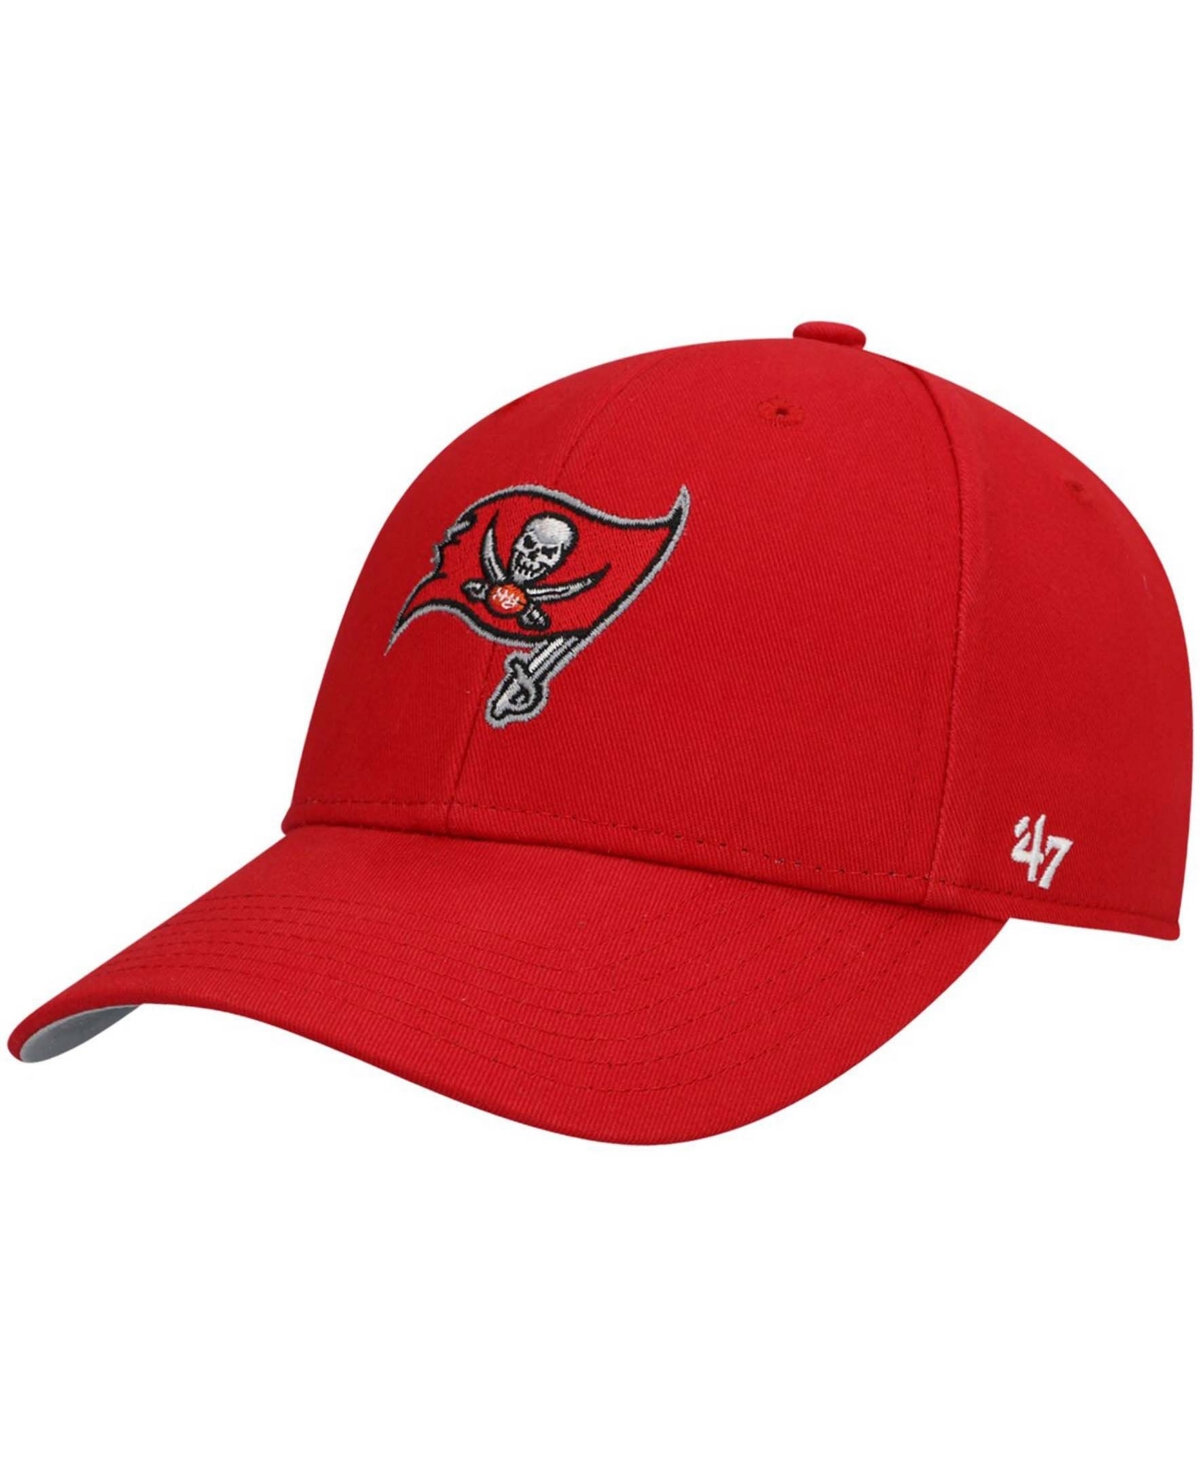 47 Brand Babies' Little Boys And Girls Red Tampa Bay Buccaneers Basic Team Mvp Adjustable Hat